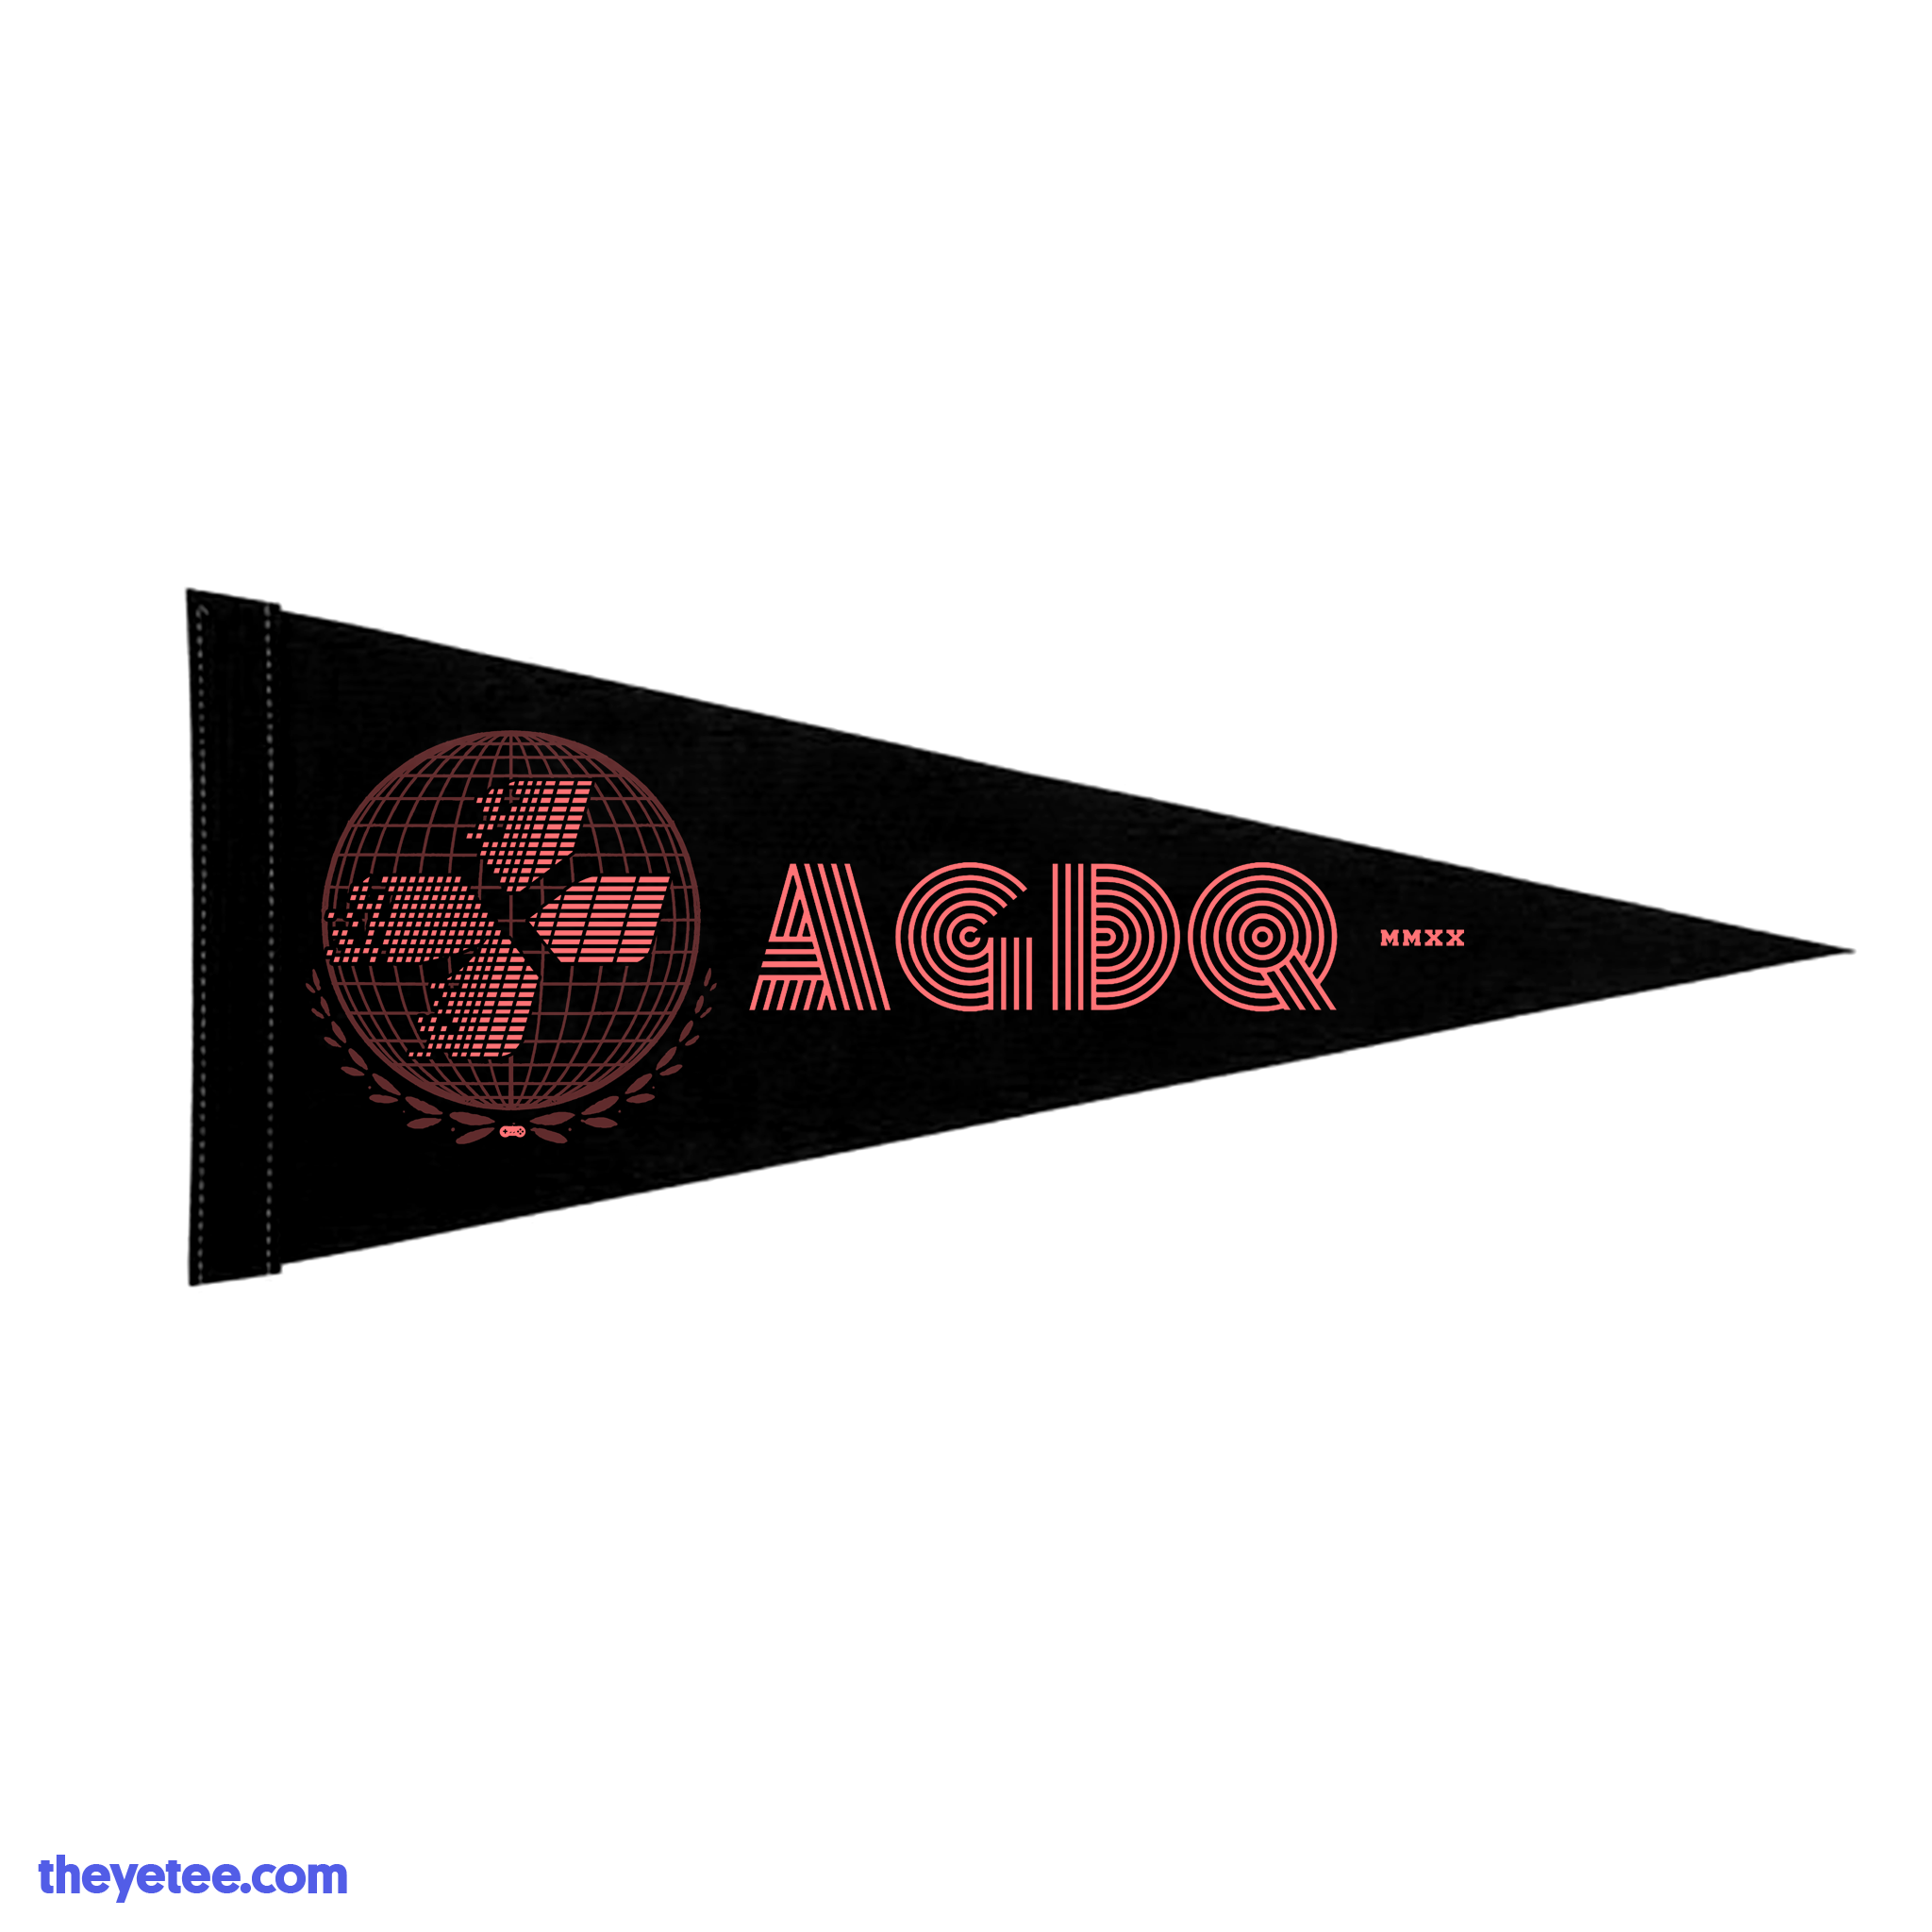 Image of AGDQ 2020 Pennant